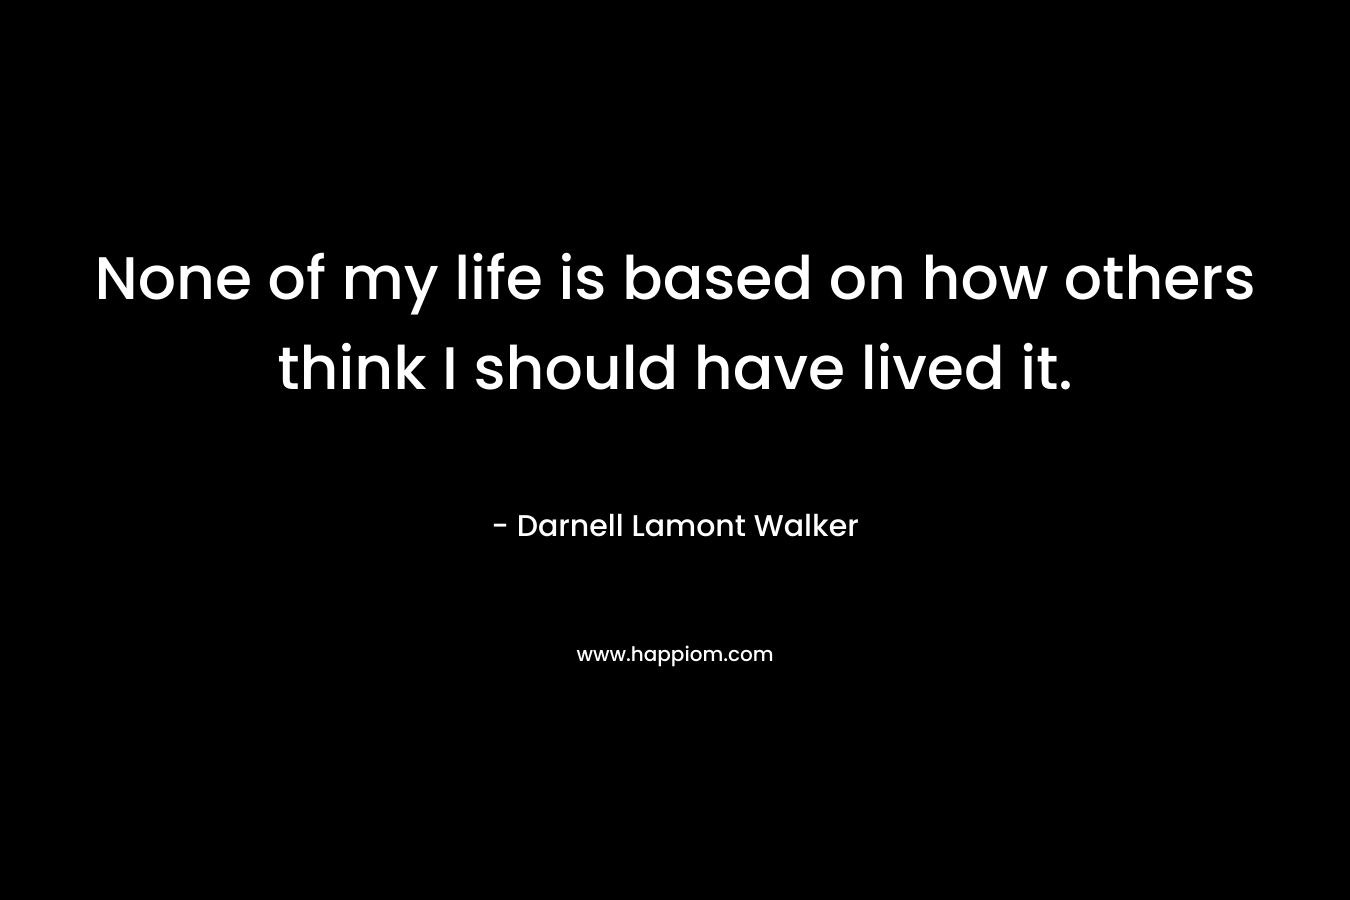 None of my life is based on how others think I should have lived it.